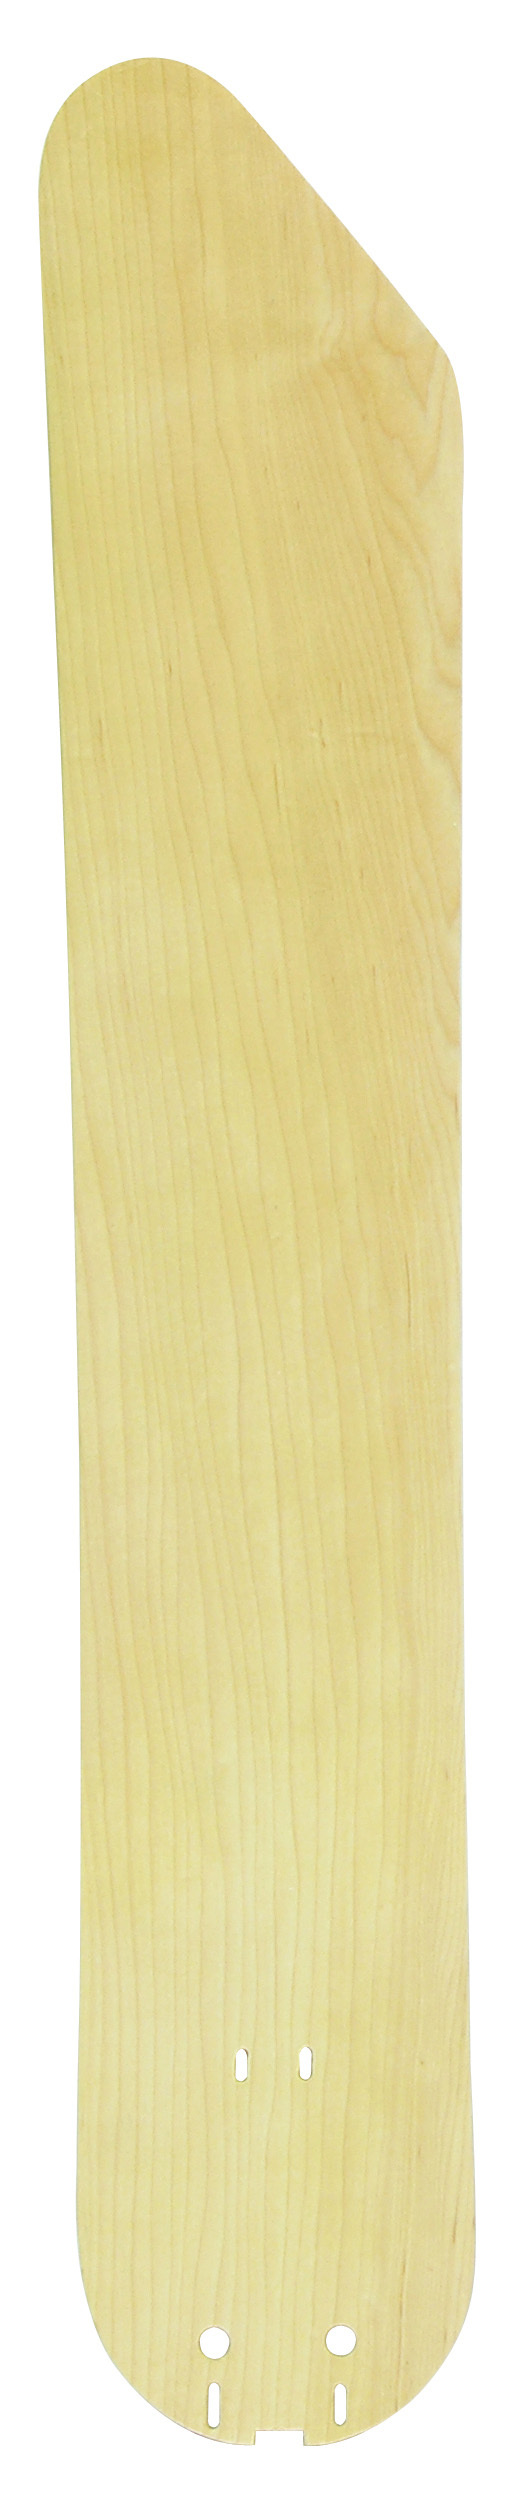 30" BLADE: CURVED, MAPLE - SET OF 5